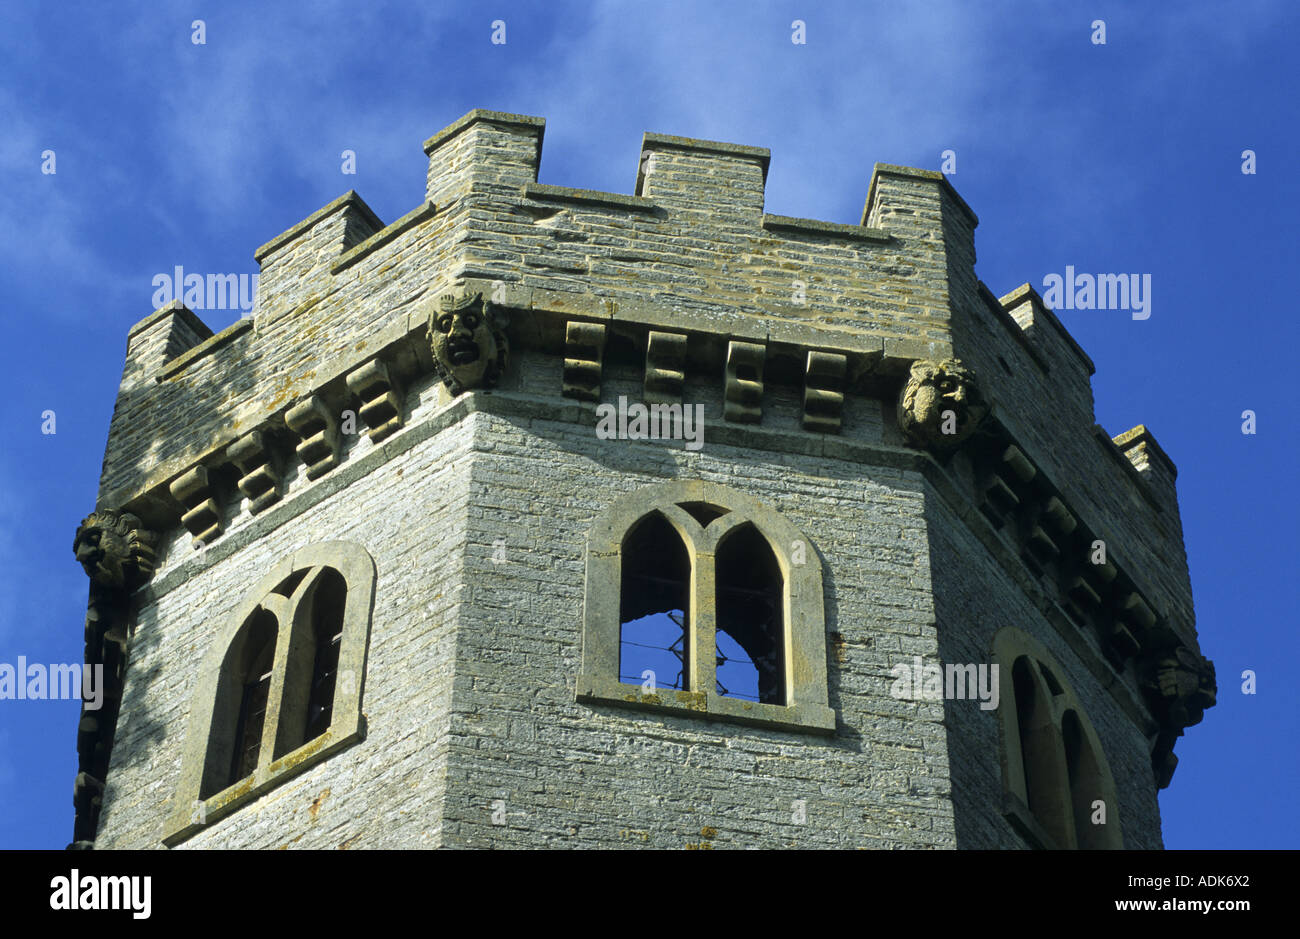 Leicester Tower at Battle of Evesham site, Worcestershire, England, UK Stock Photo